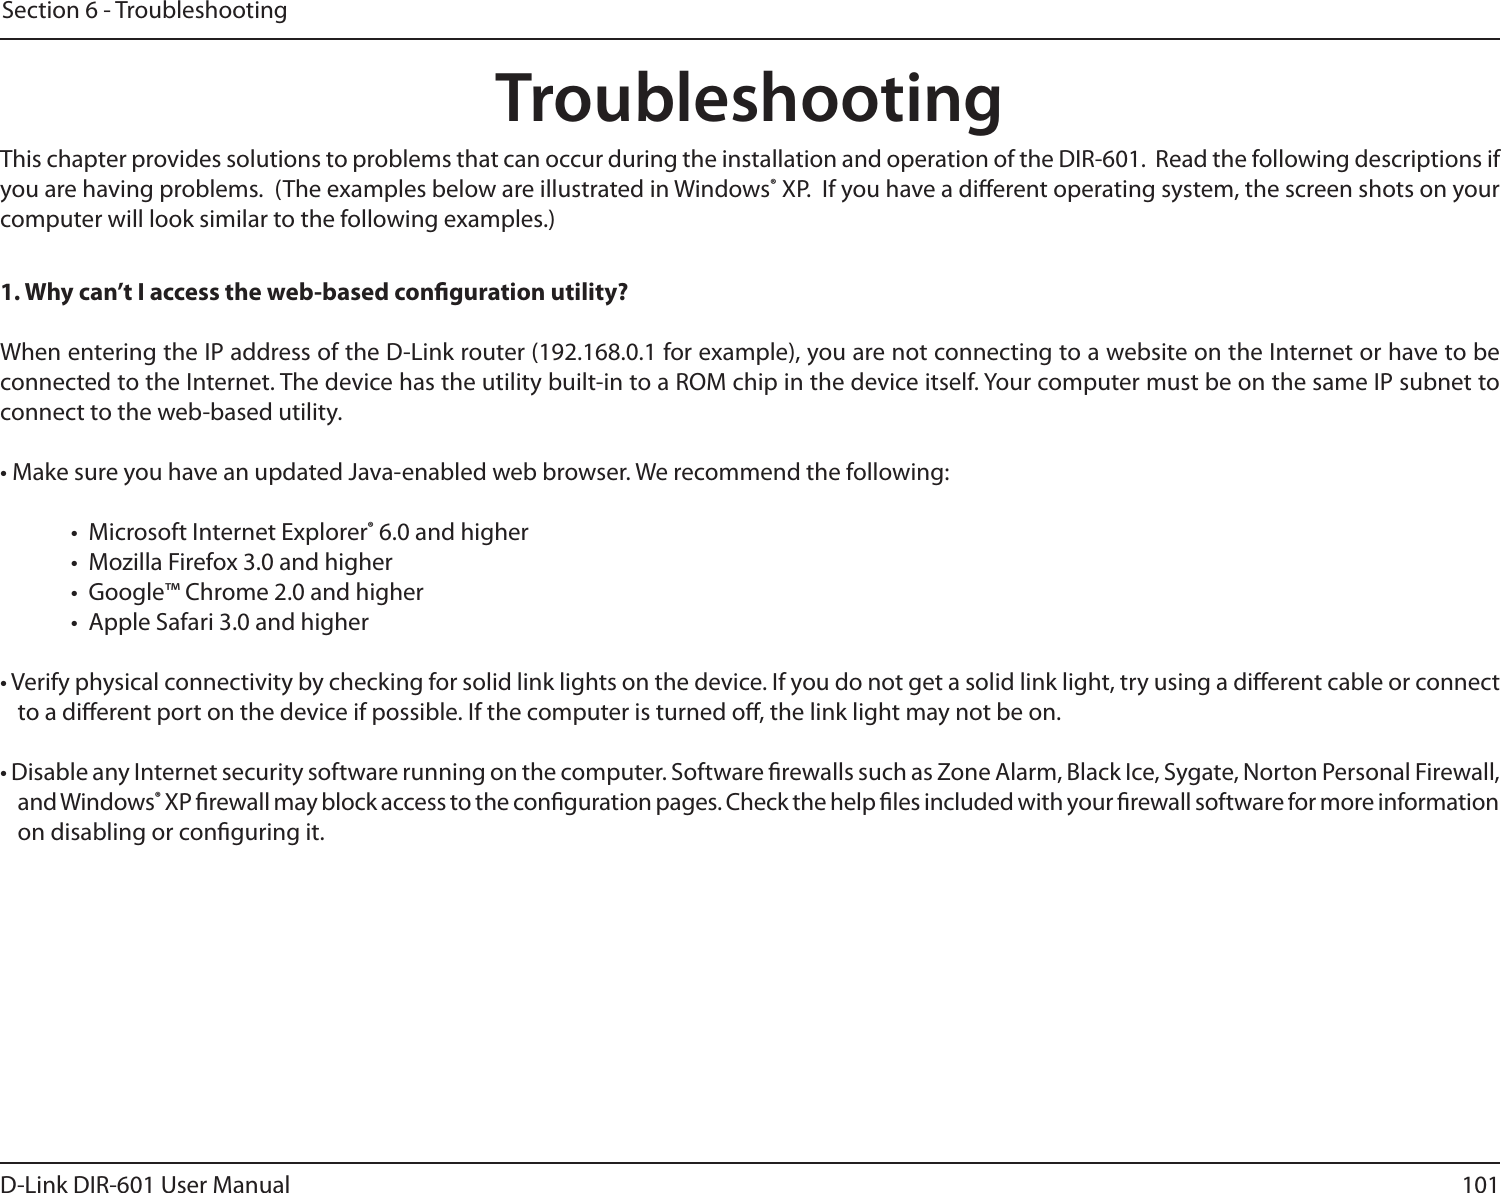 101D-Link DIR-601 User ManualSection 6 - TroubleshootingTroubleshootingThis chapter provides solutions to problems that can occur during the installation and operation of the DIR-601.  Read the following descriptions if you are having problems.  (The examples below are illustrated in Windows® XP.  If you have a dierent operating system, the screen shots on your computer will look similar to the following examples.)1.Whycan’tIaccesstheweb-basedcongurationutility?When entering the IP address of the D-Link router (192.168.0.1 for example), you are not connecting to a website on the Internet or have to be connected to the Internet. The device has the utility built-in to a ROM chip in the device itself. Your computer must be on the same IP subnet to connect to the web-based utility. • Make sure you have an updated Java-enabled web browser. We recommend the following: •  Microsoft Internet Explorer® 6.0 and higher•  Mozilla Firefox 3.0 and higher•  Google™ Chrome 2.0 and higher•  Apple Safari 3.0 and higher• Verify physical connectivity by checking for solid link lights on the device. If you do not get a solid link light, try using a dierent cable or connect to a dierent port on the device if possible. If the computer is turned o, the link light may not be on.• Disable any Internet security software running on the computer. Software rewalls such as Zone Alarm, Black Ice, Sygate, Norton Personal Firewall, and Windows® XP rewall may block access to the conguration pages. Check the help les included with your rewall software for more information on disabling or conguring it.